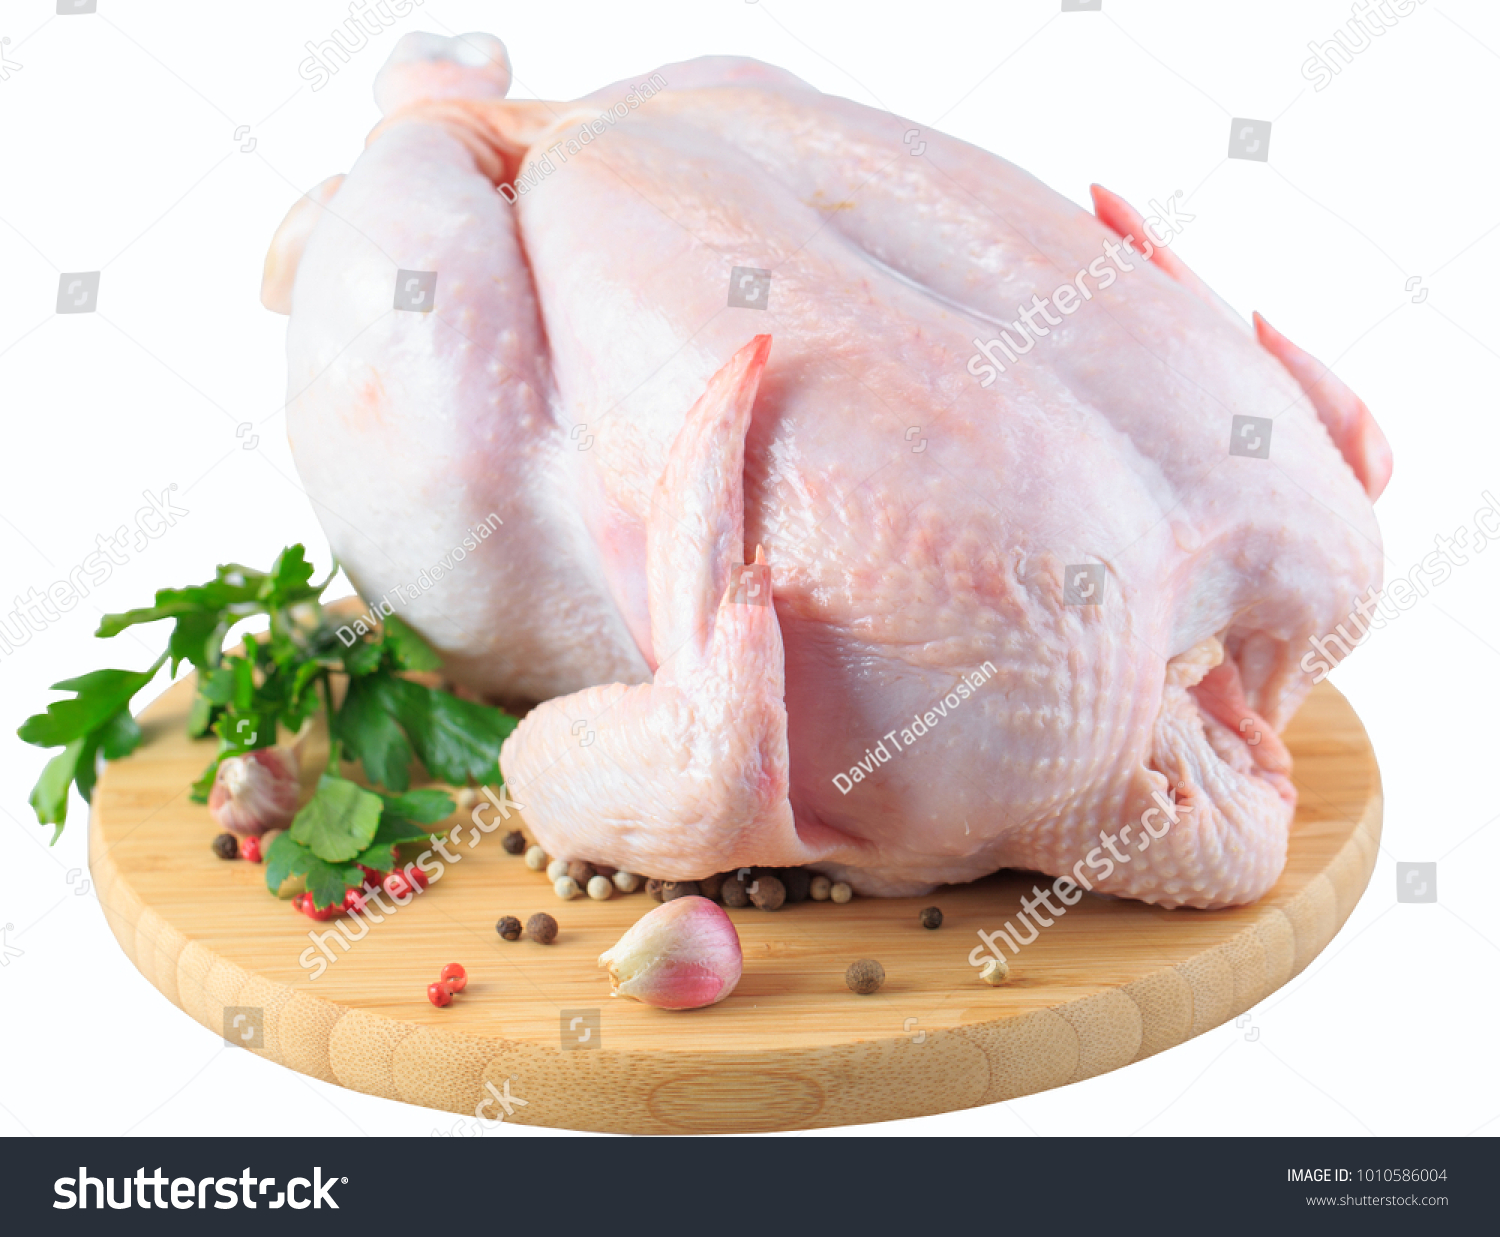 raw chicken carcass on the cutting board isolated on white background #1010586004